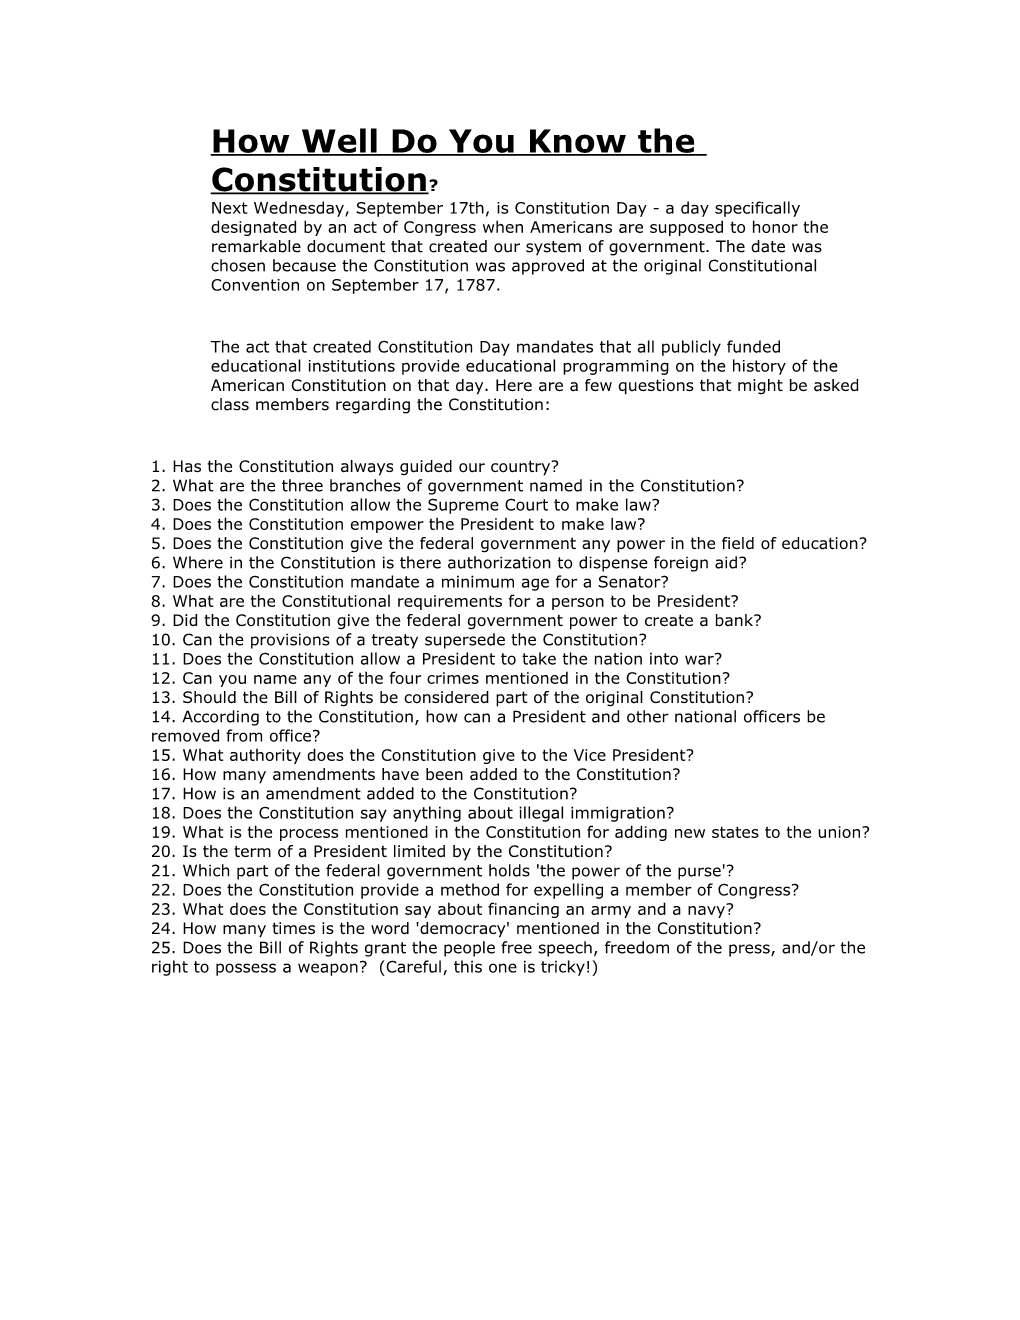 How Well Do You Know the Constitution